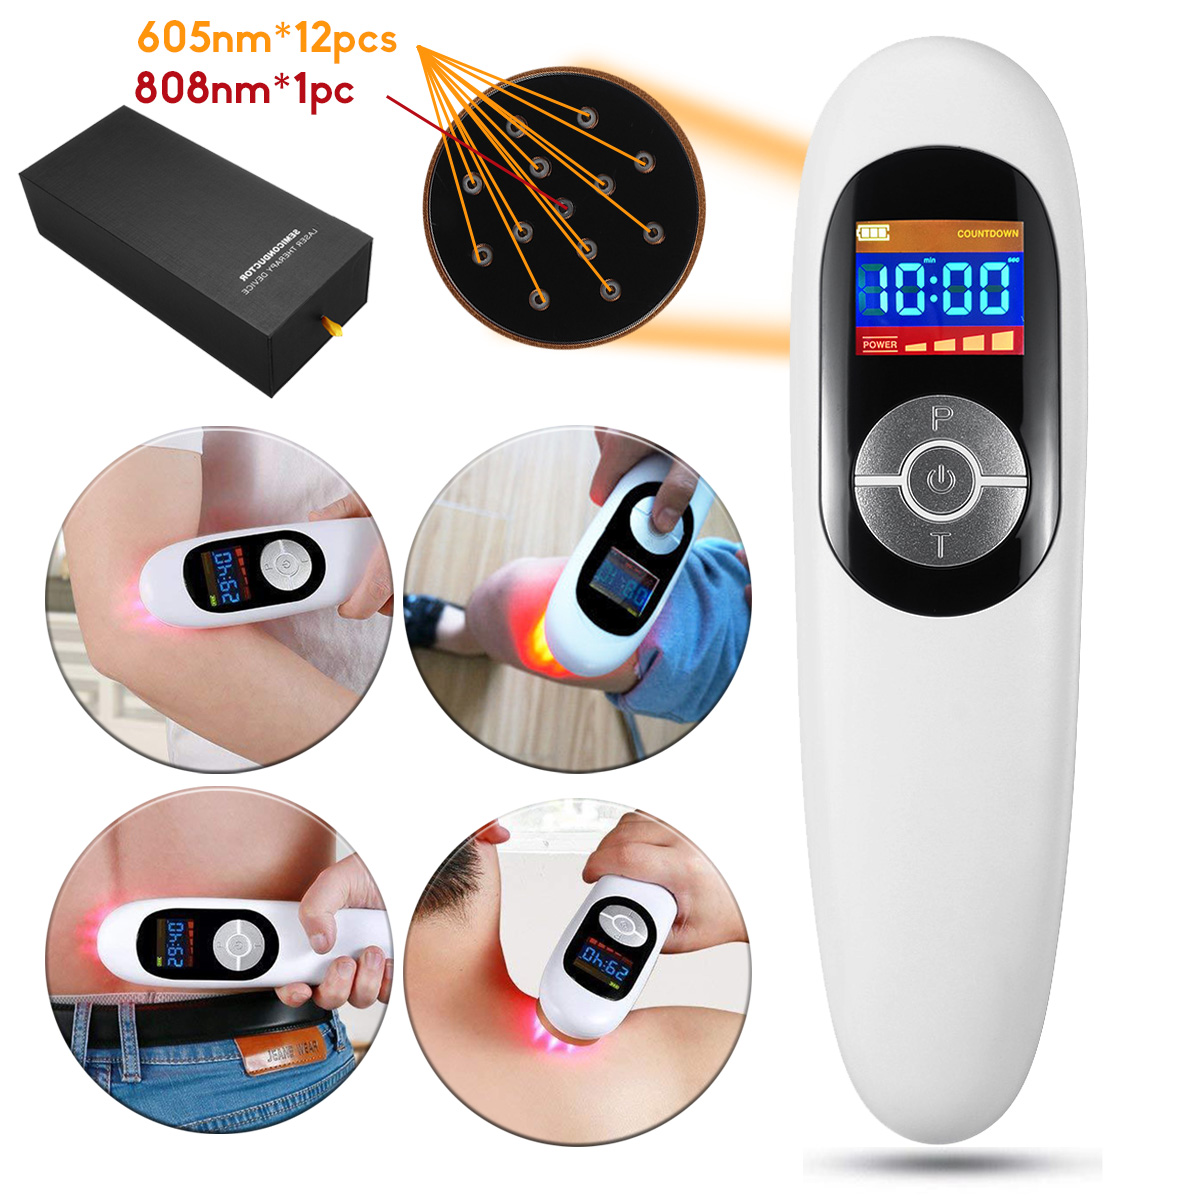 650nm 808nm Laser Therapy Device For Pain Relief